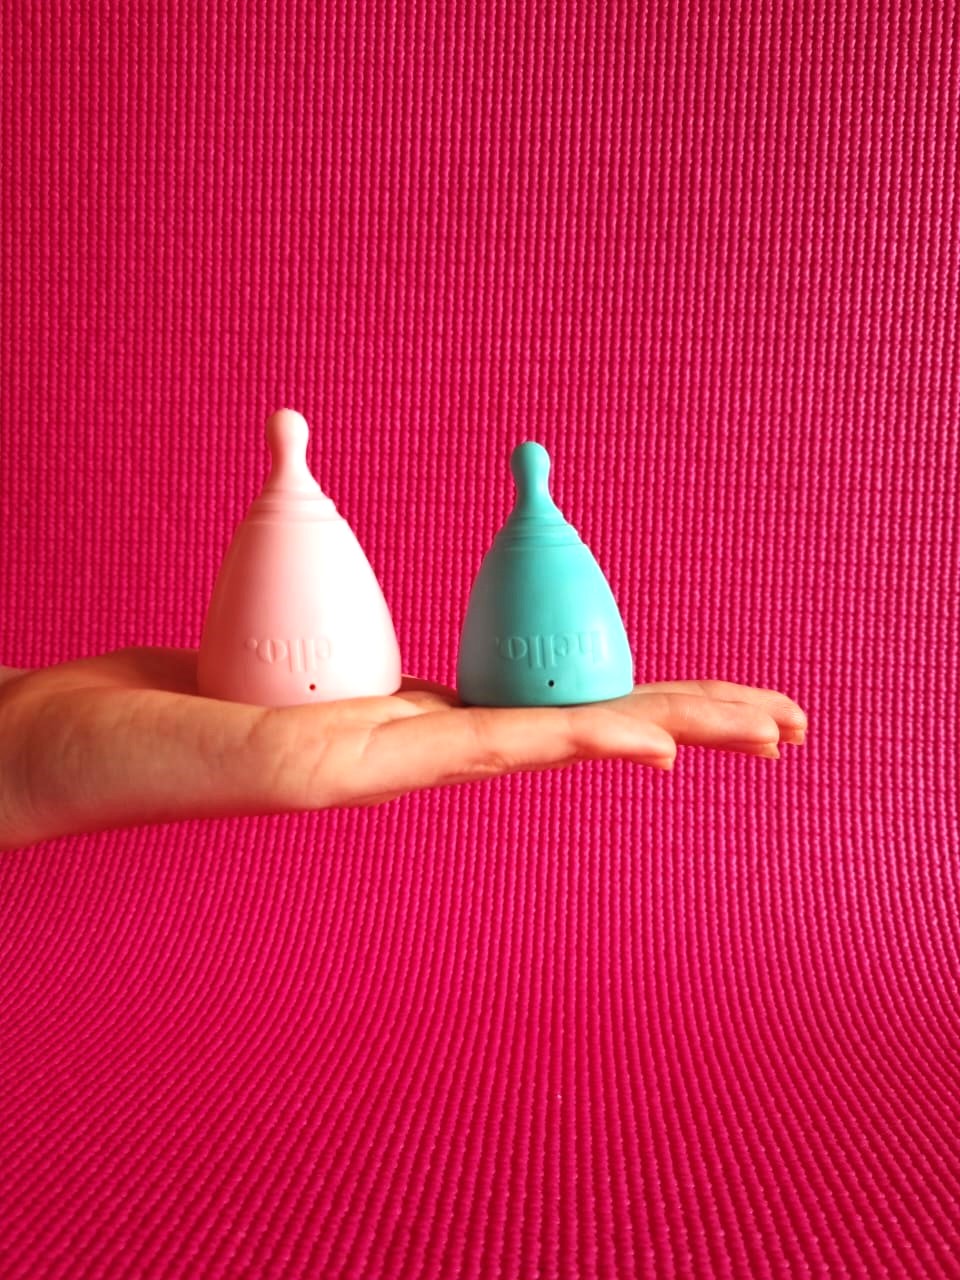 HANDS HOLDING MENSTRUAL CUPS ON PINK BACKGROUND